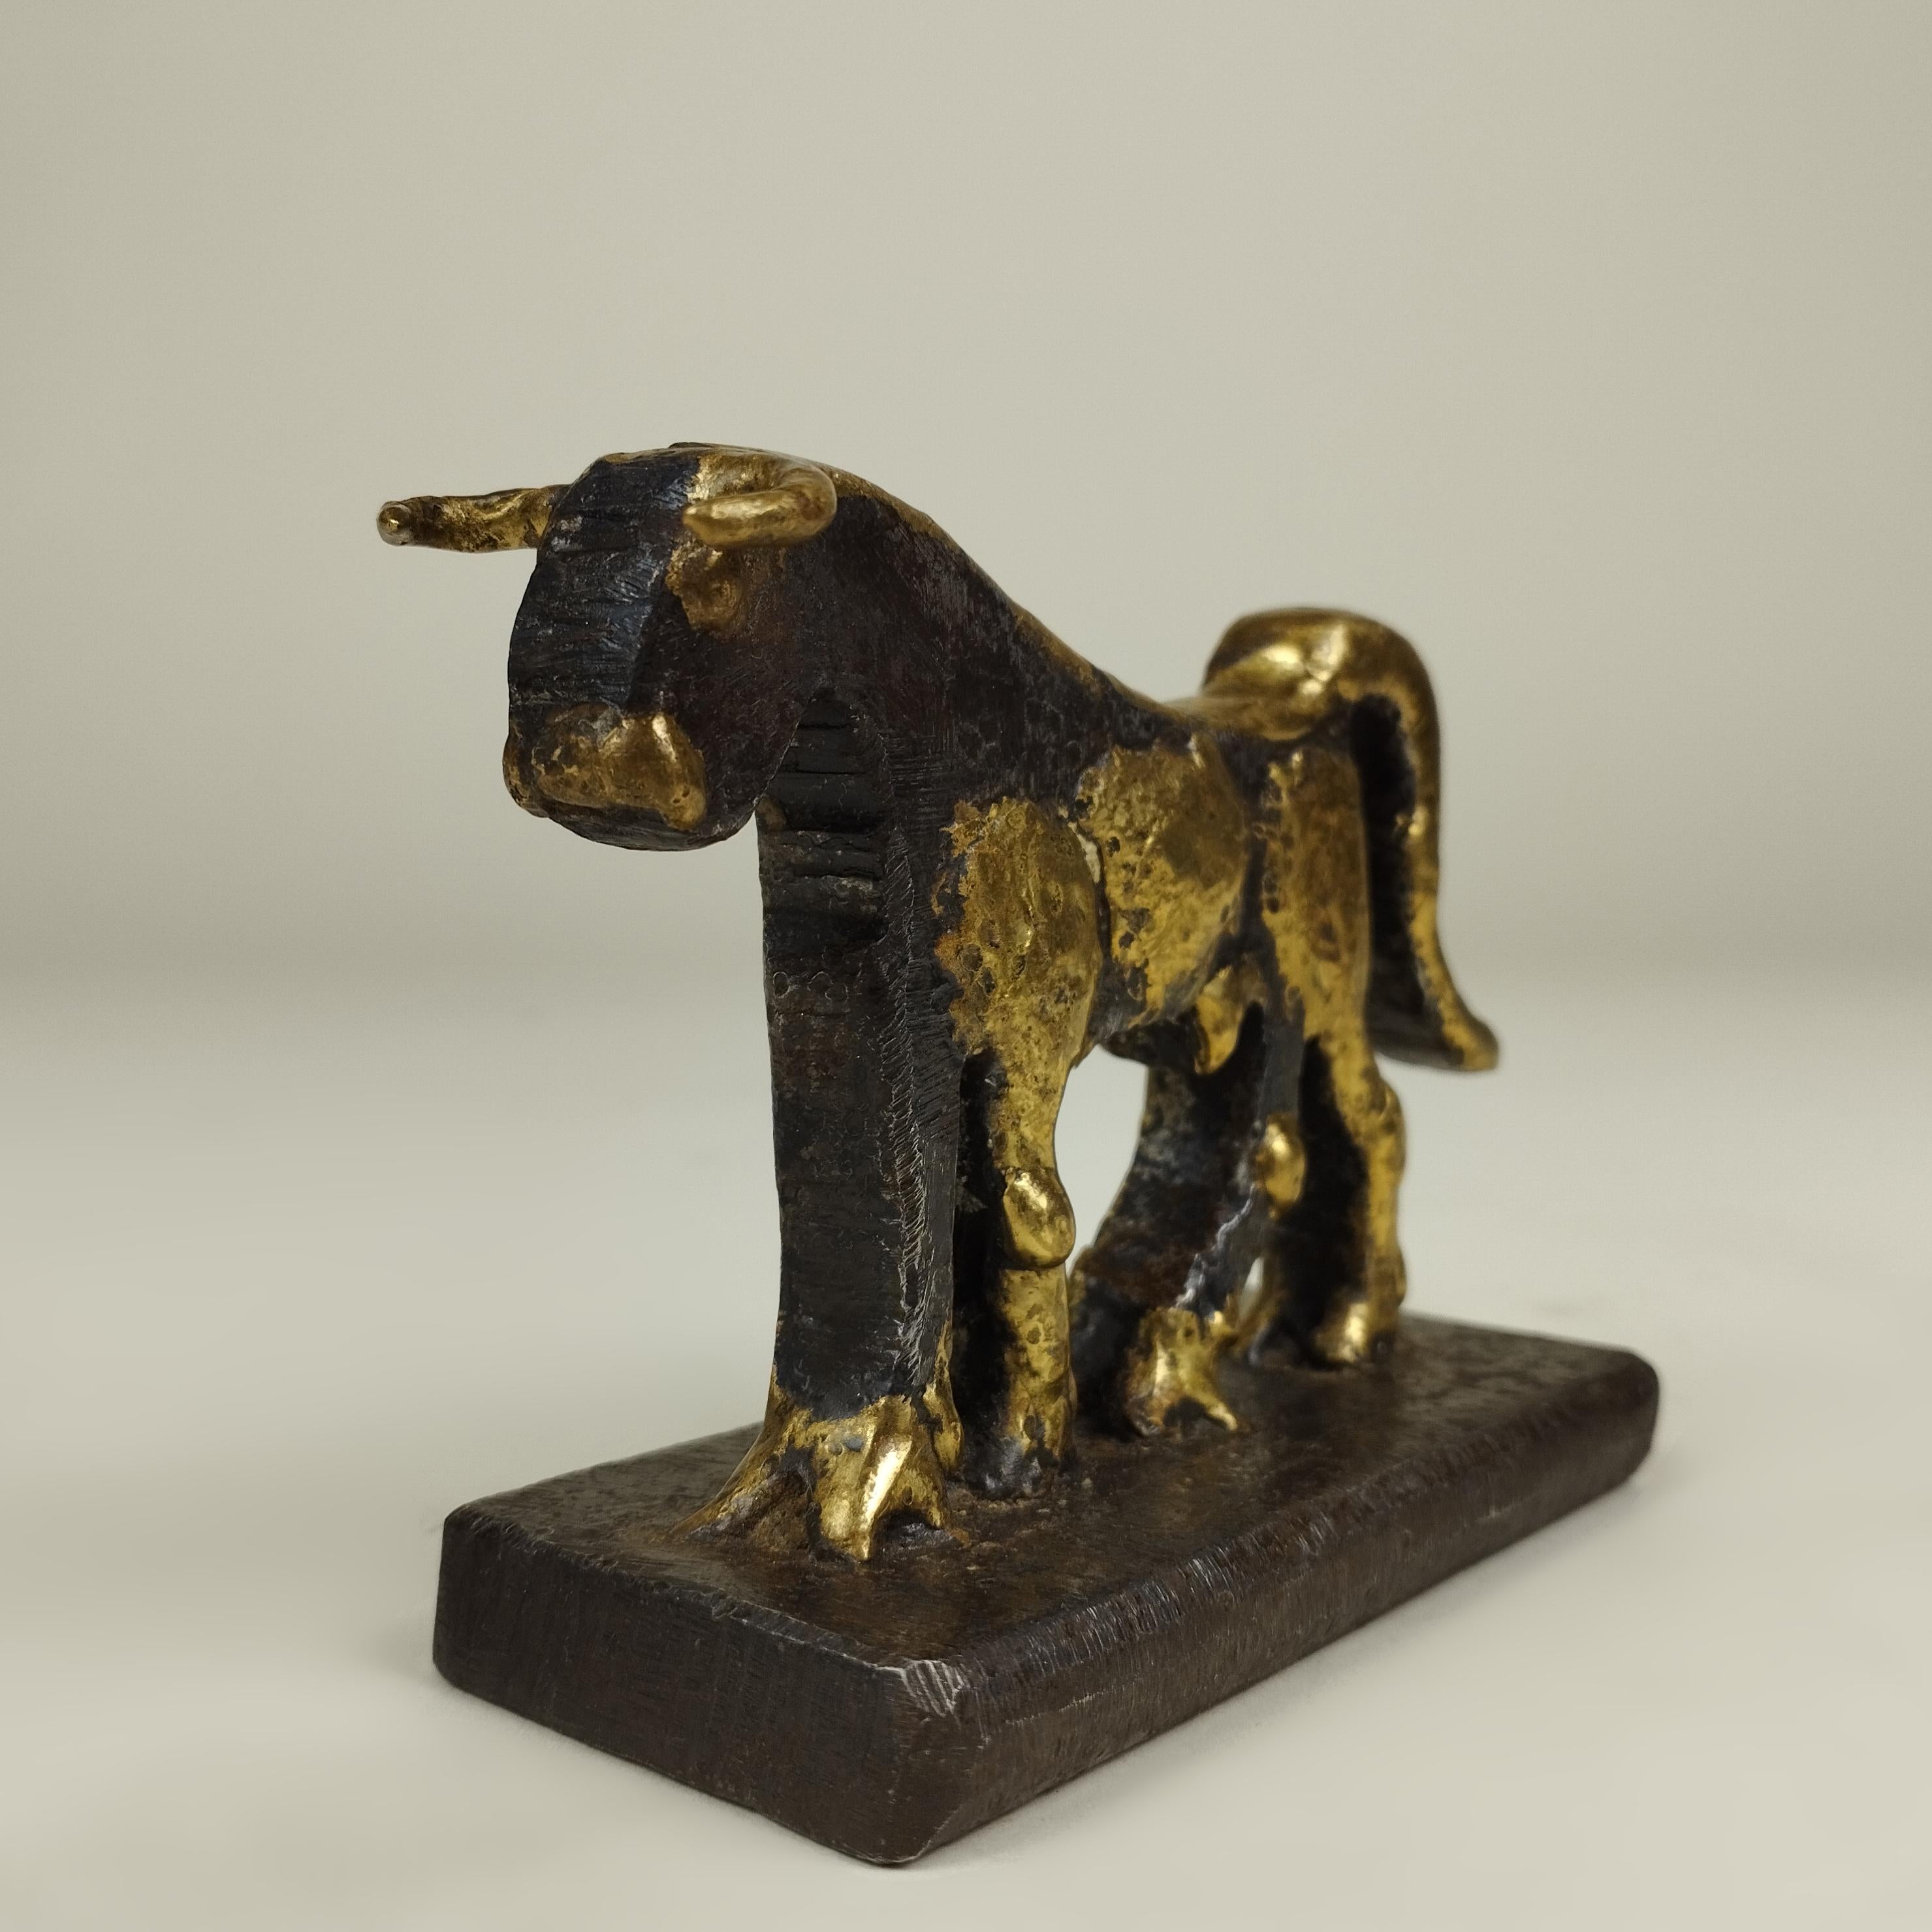 A Brutalist bull steel and bronze sculpture by Hungarian-born Mexican artist Pal Kepenyes. The sculpture is signed on the base.

A sculptor from Hungary who was nationalized Mexican, Pal Kepenyes (1926 - 2021) resided in Acapulco where he had a